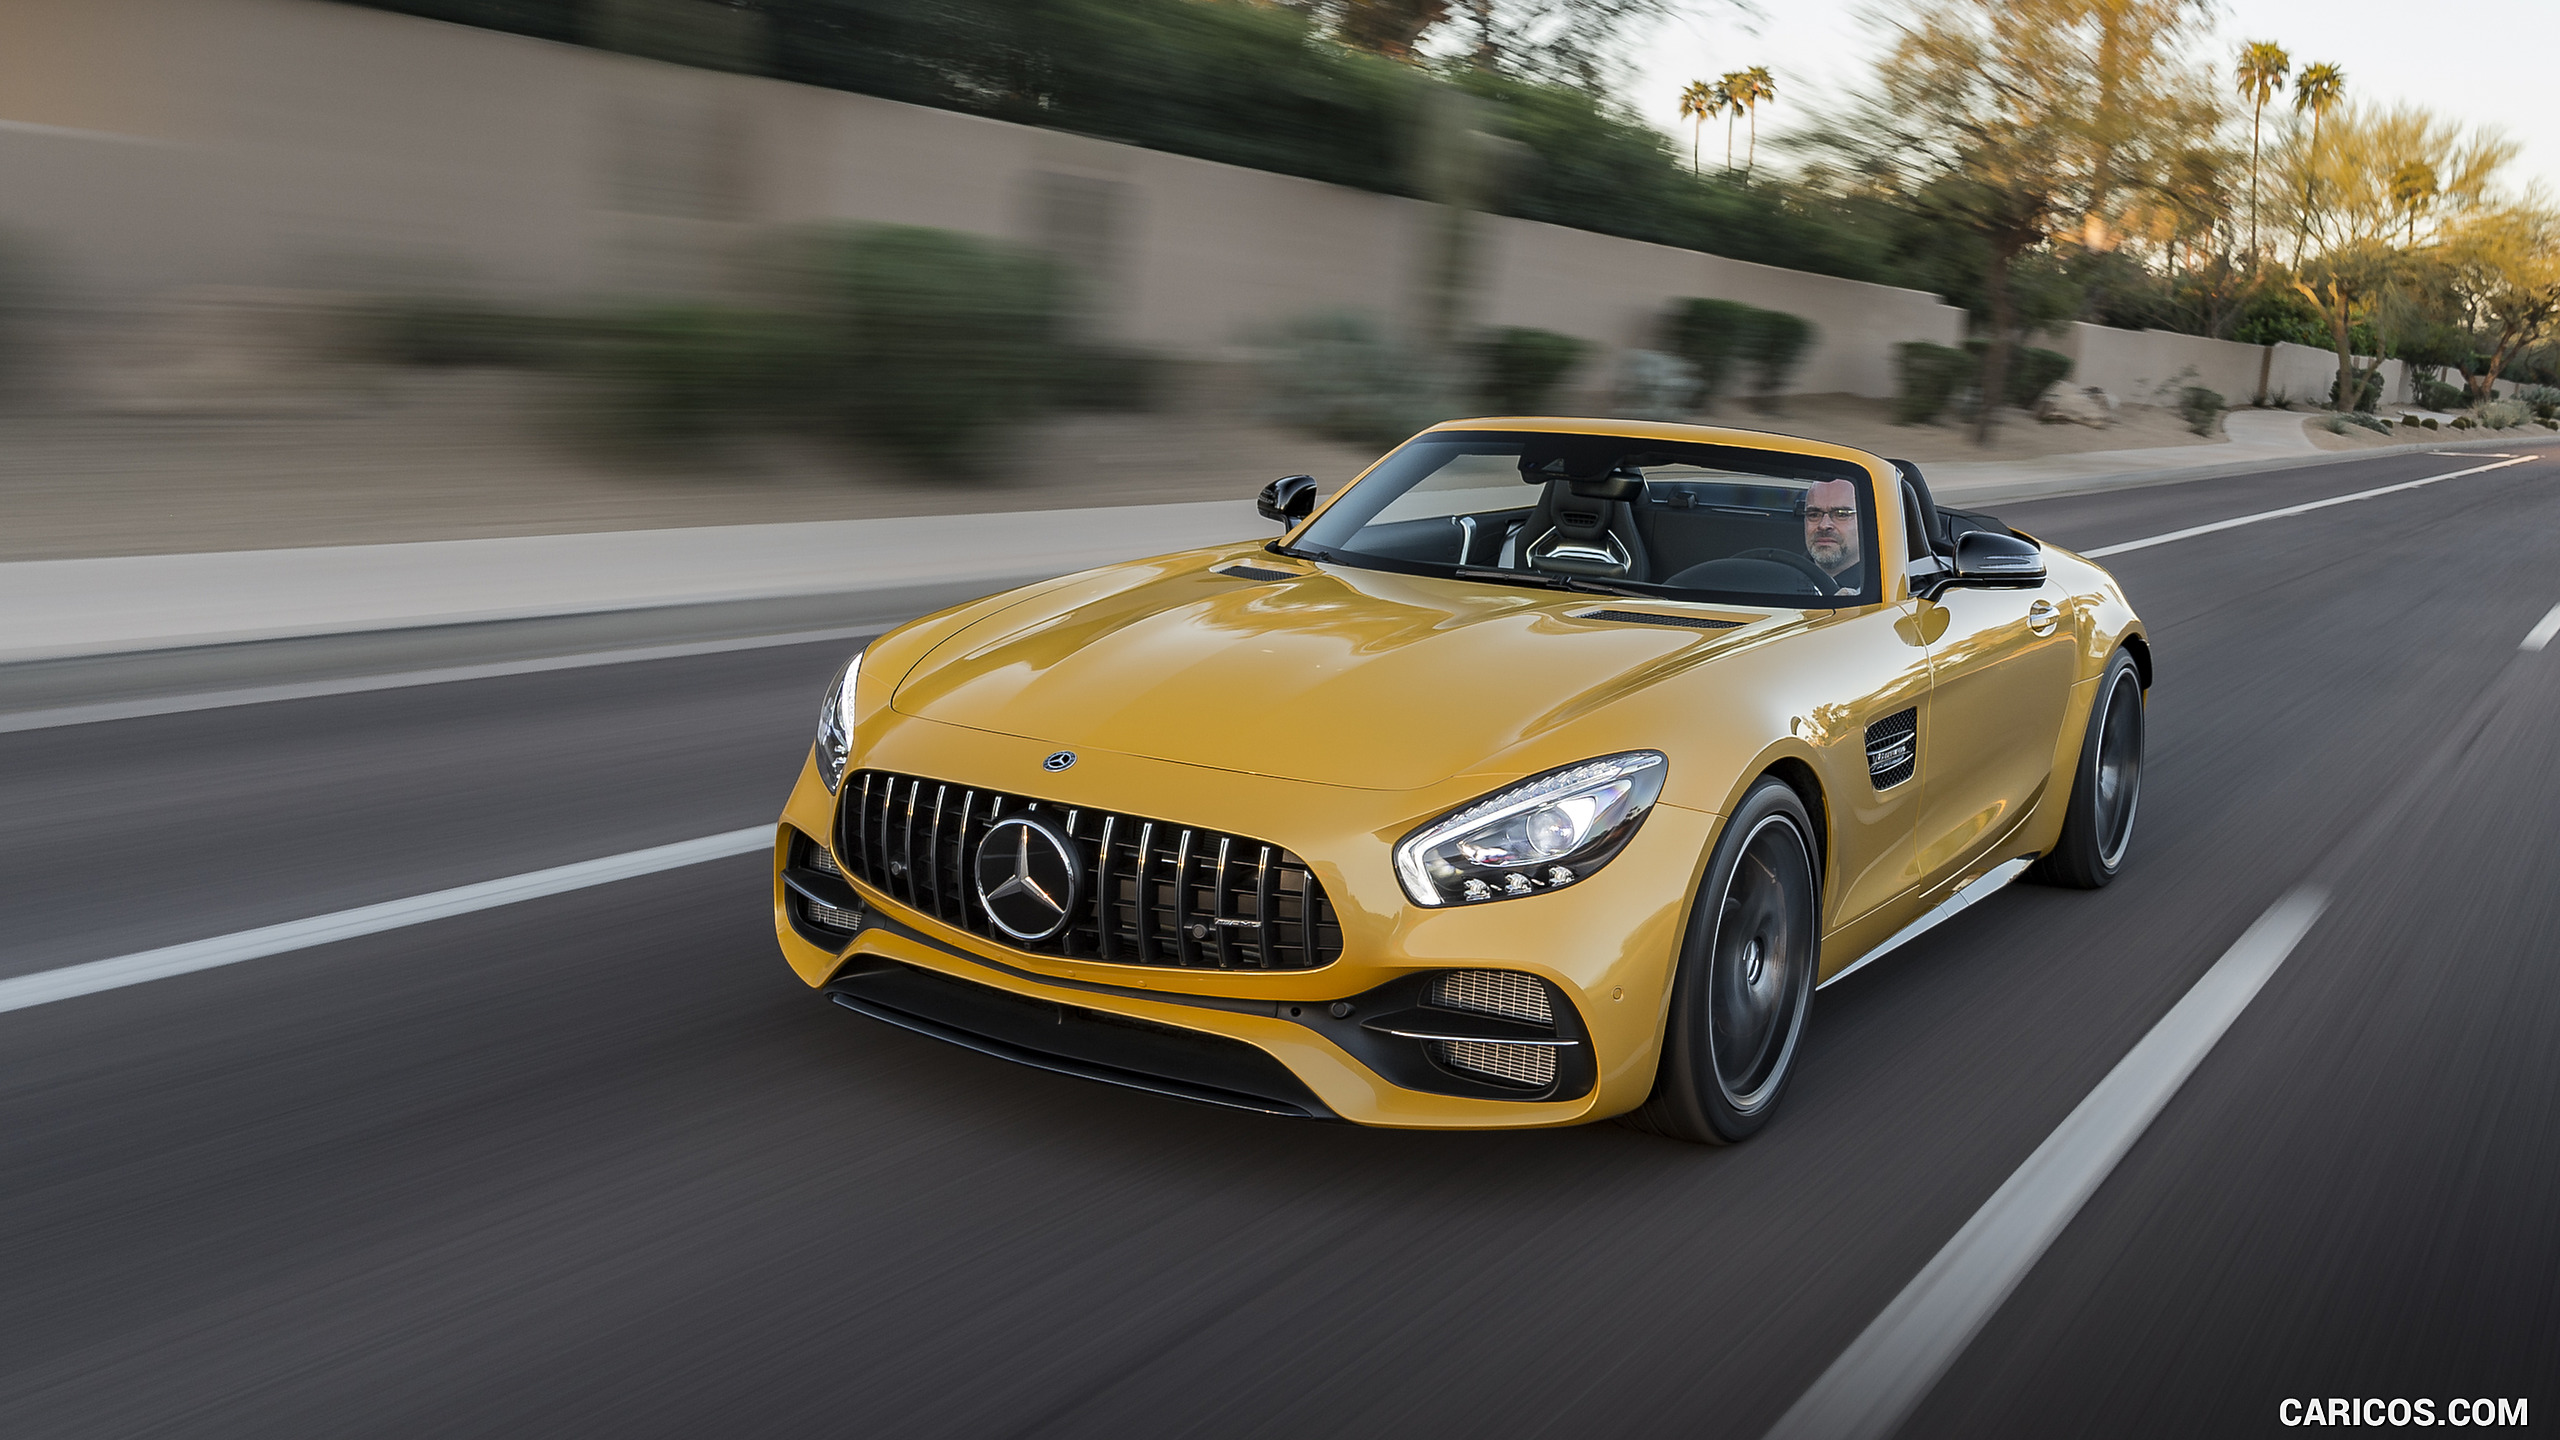 2018 Mercedes-AMG GT C Roadster - Front Three-Quarter, #223 of 350